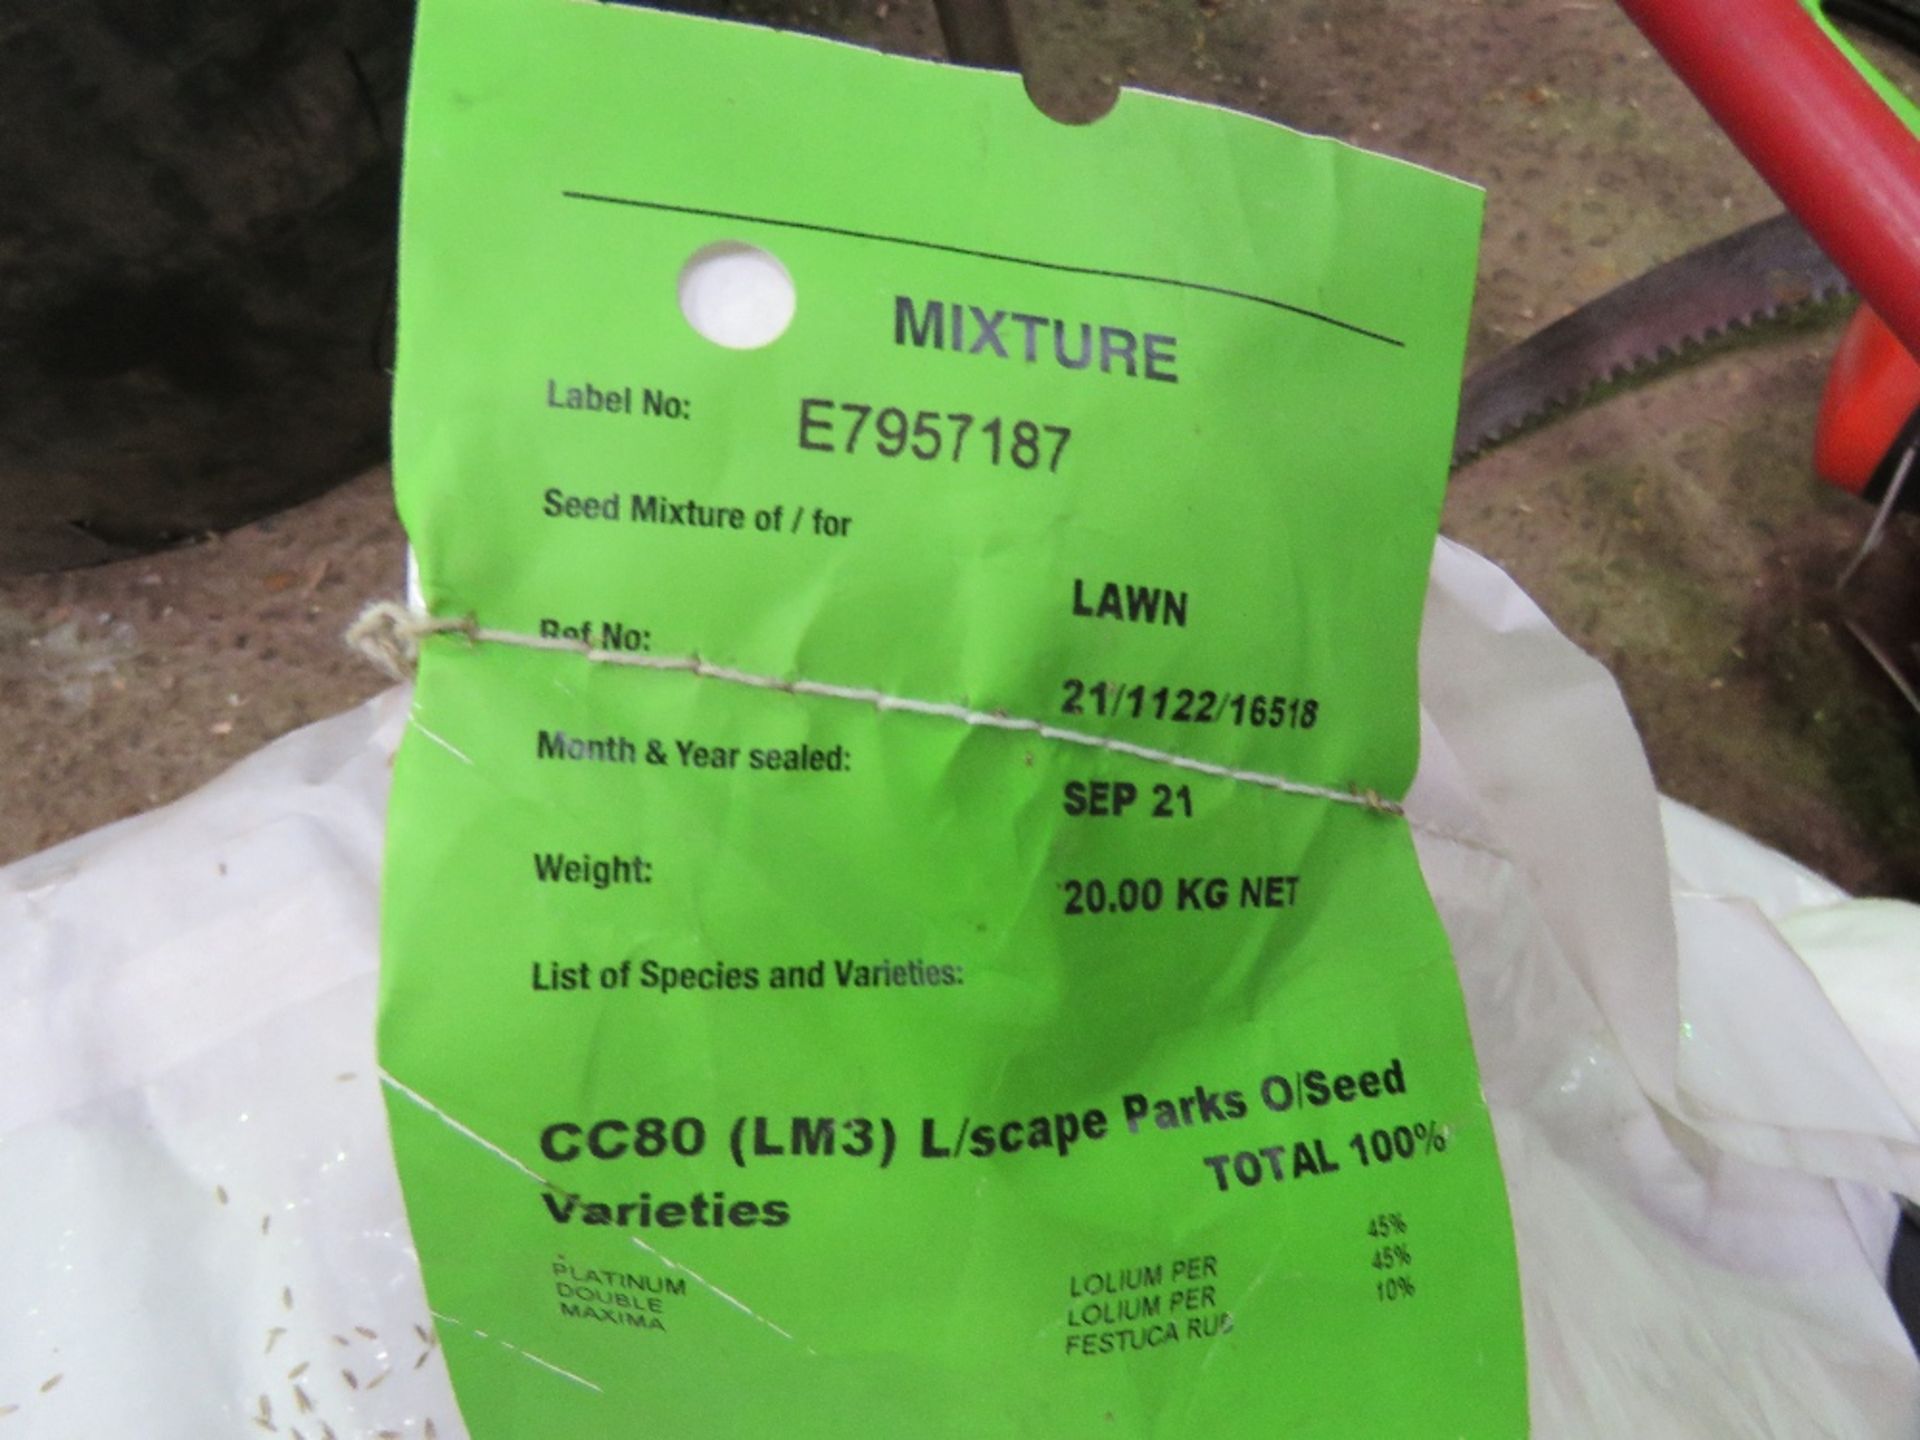 2 X PART BAGS OF GRASS SEED PLUS AN IRRIGATOR HEAD. DIRECT FROM LOCAL LANDSCAPE COMPANY WHO ARE CLOS - Image 4 of 4